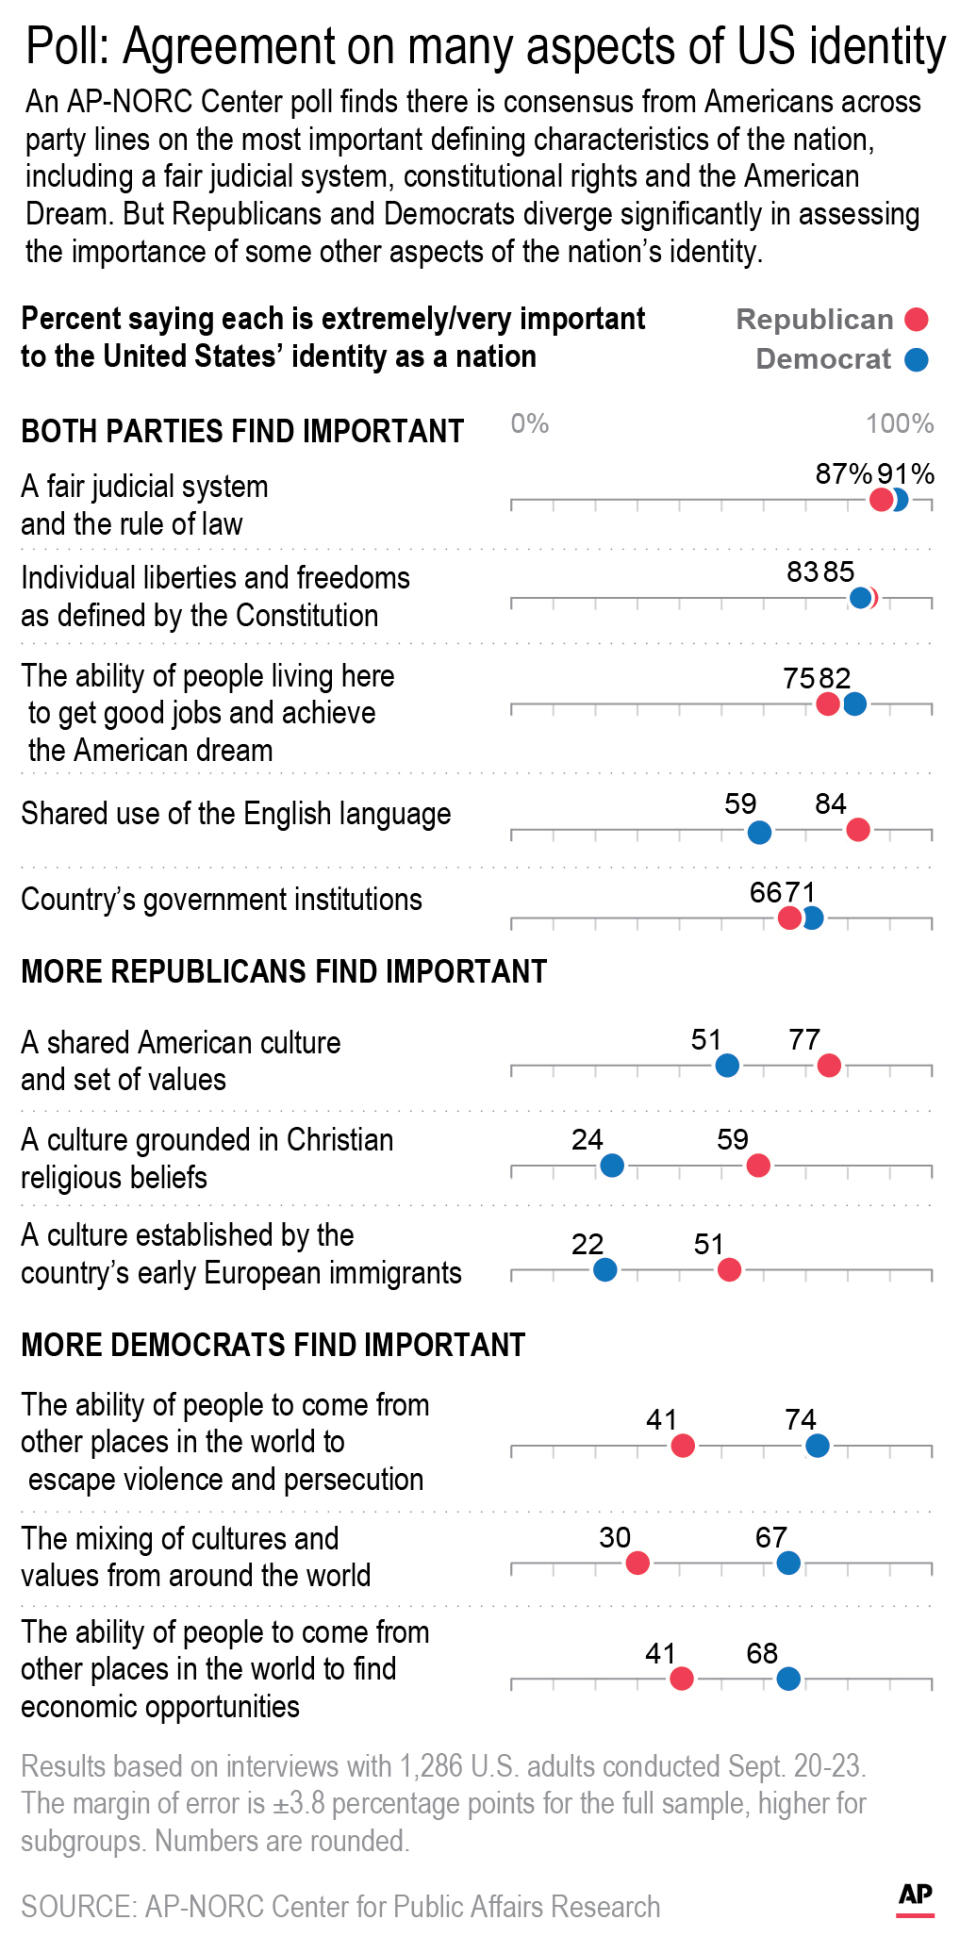 An AP-NORC Center poll finds there is consensus from Americans across party lines on the most important defining characteristics of the nation.;